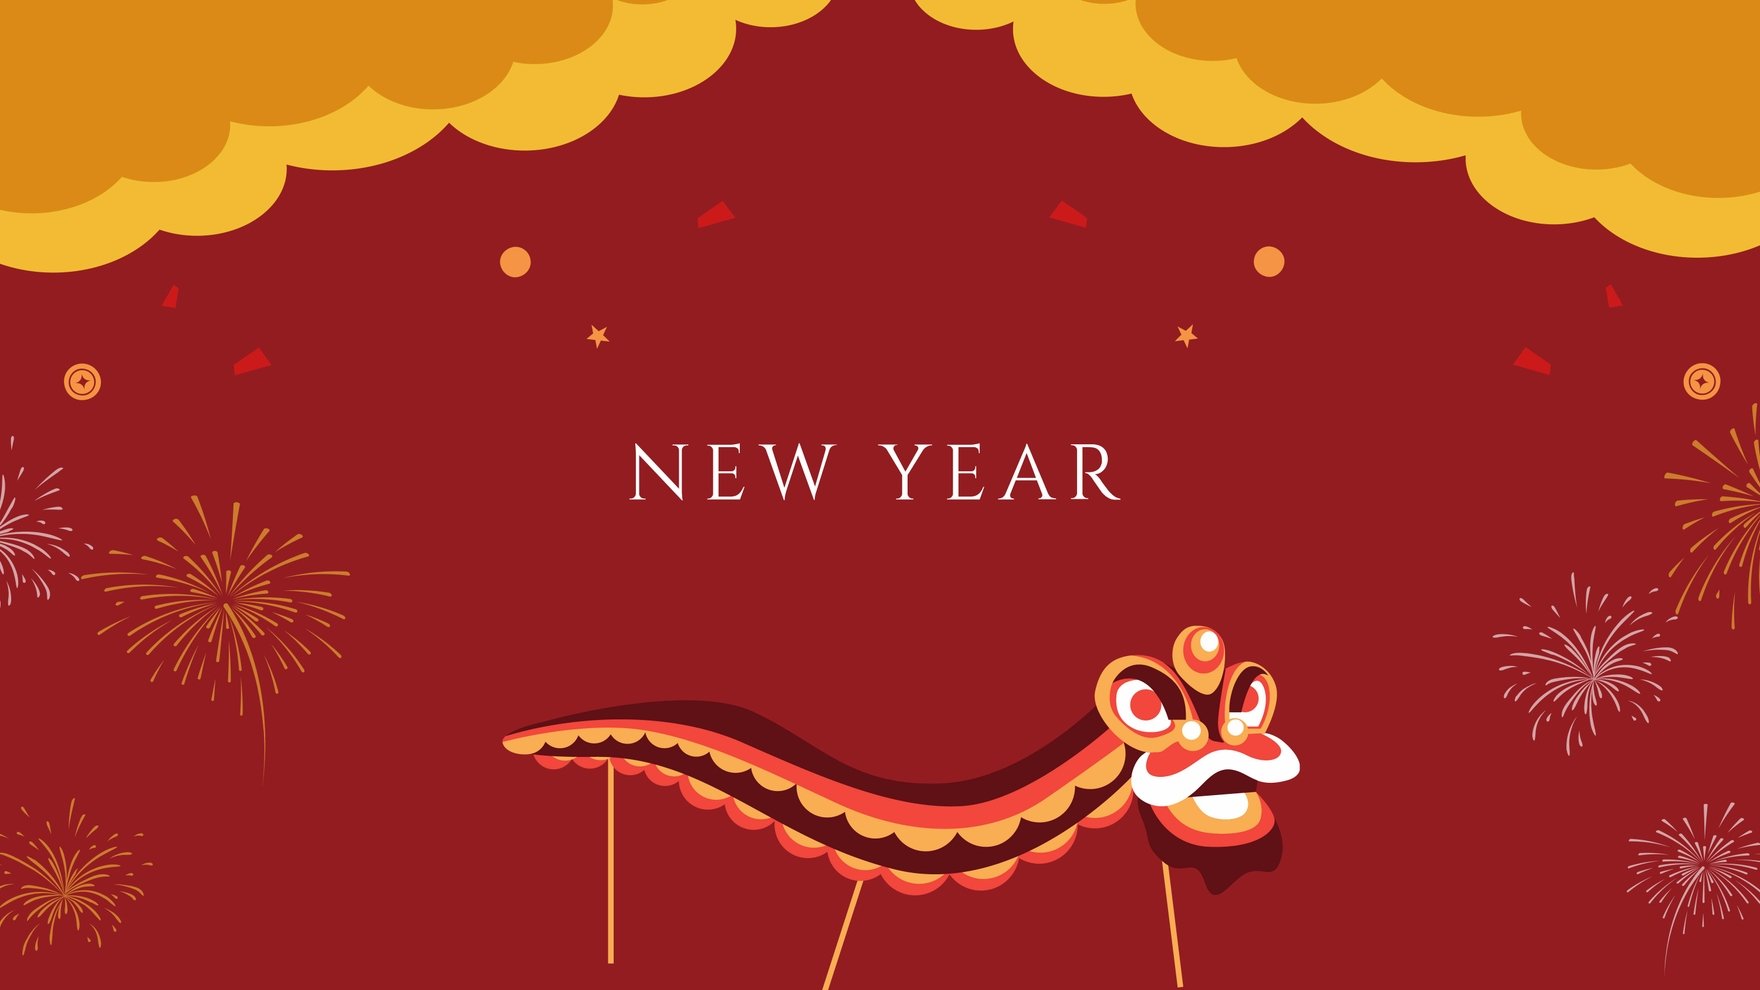 Free Chinese New Year Zoom Background - EPS, Illustrator, JPG, PSD, PNG,  PDF, SVG 